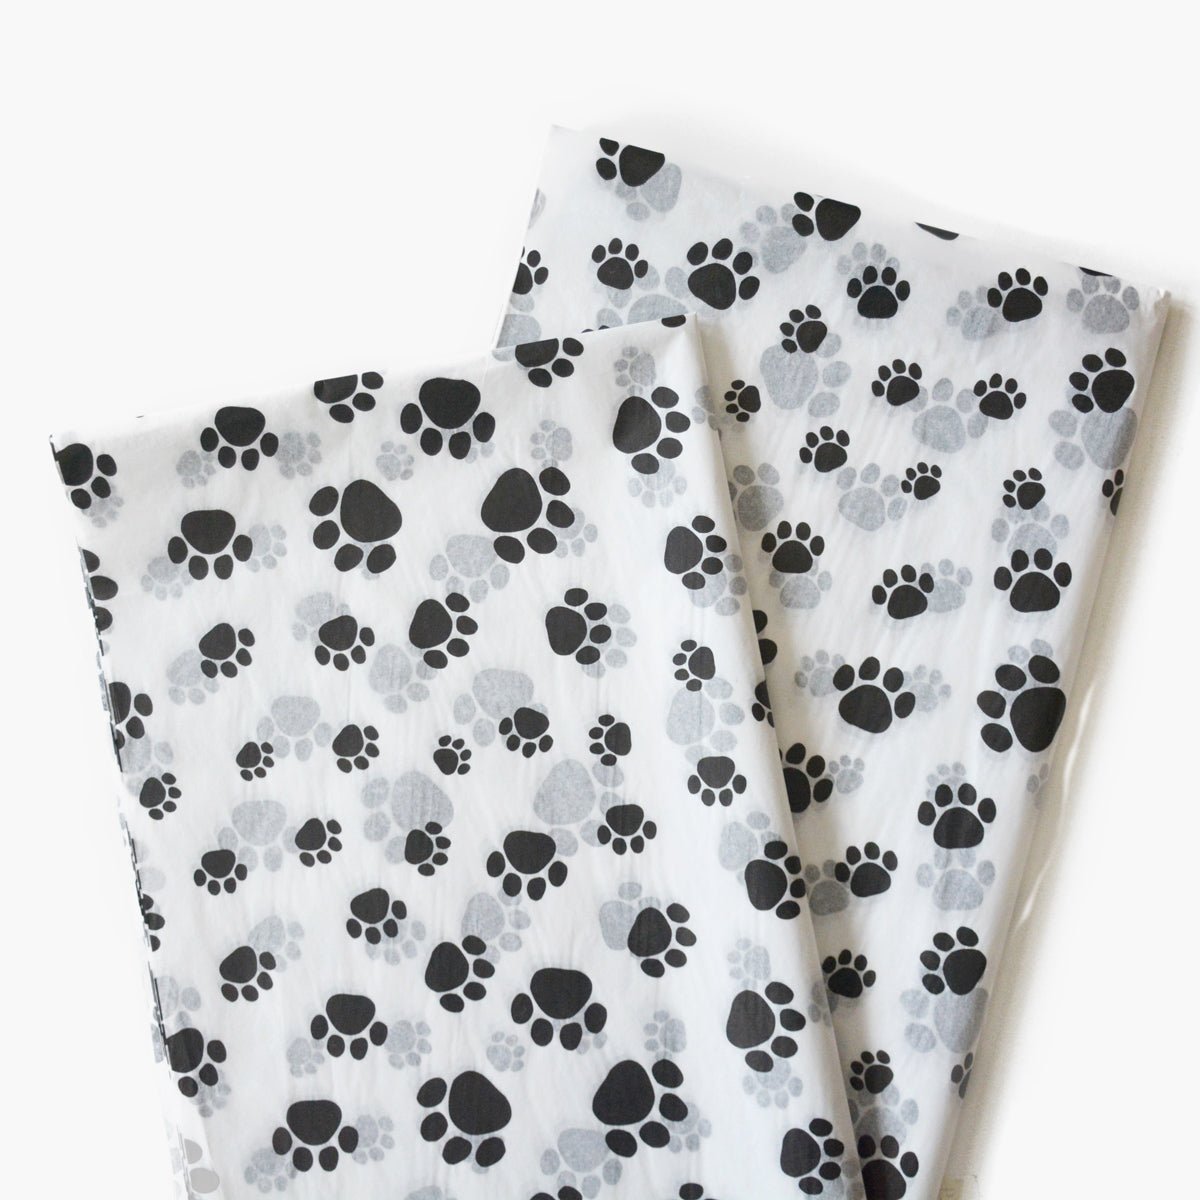 Puppy Paws Tissue Paper - Dog Paw Pattern Gift Wrapping for Dogs and Dog Lovers, Navy Ocean Pattern Gift Wrapping Paper, Paper Craft Supplies